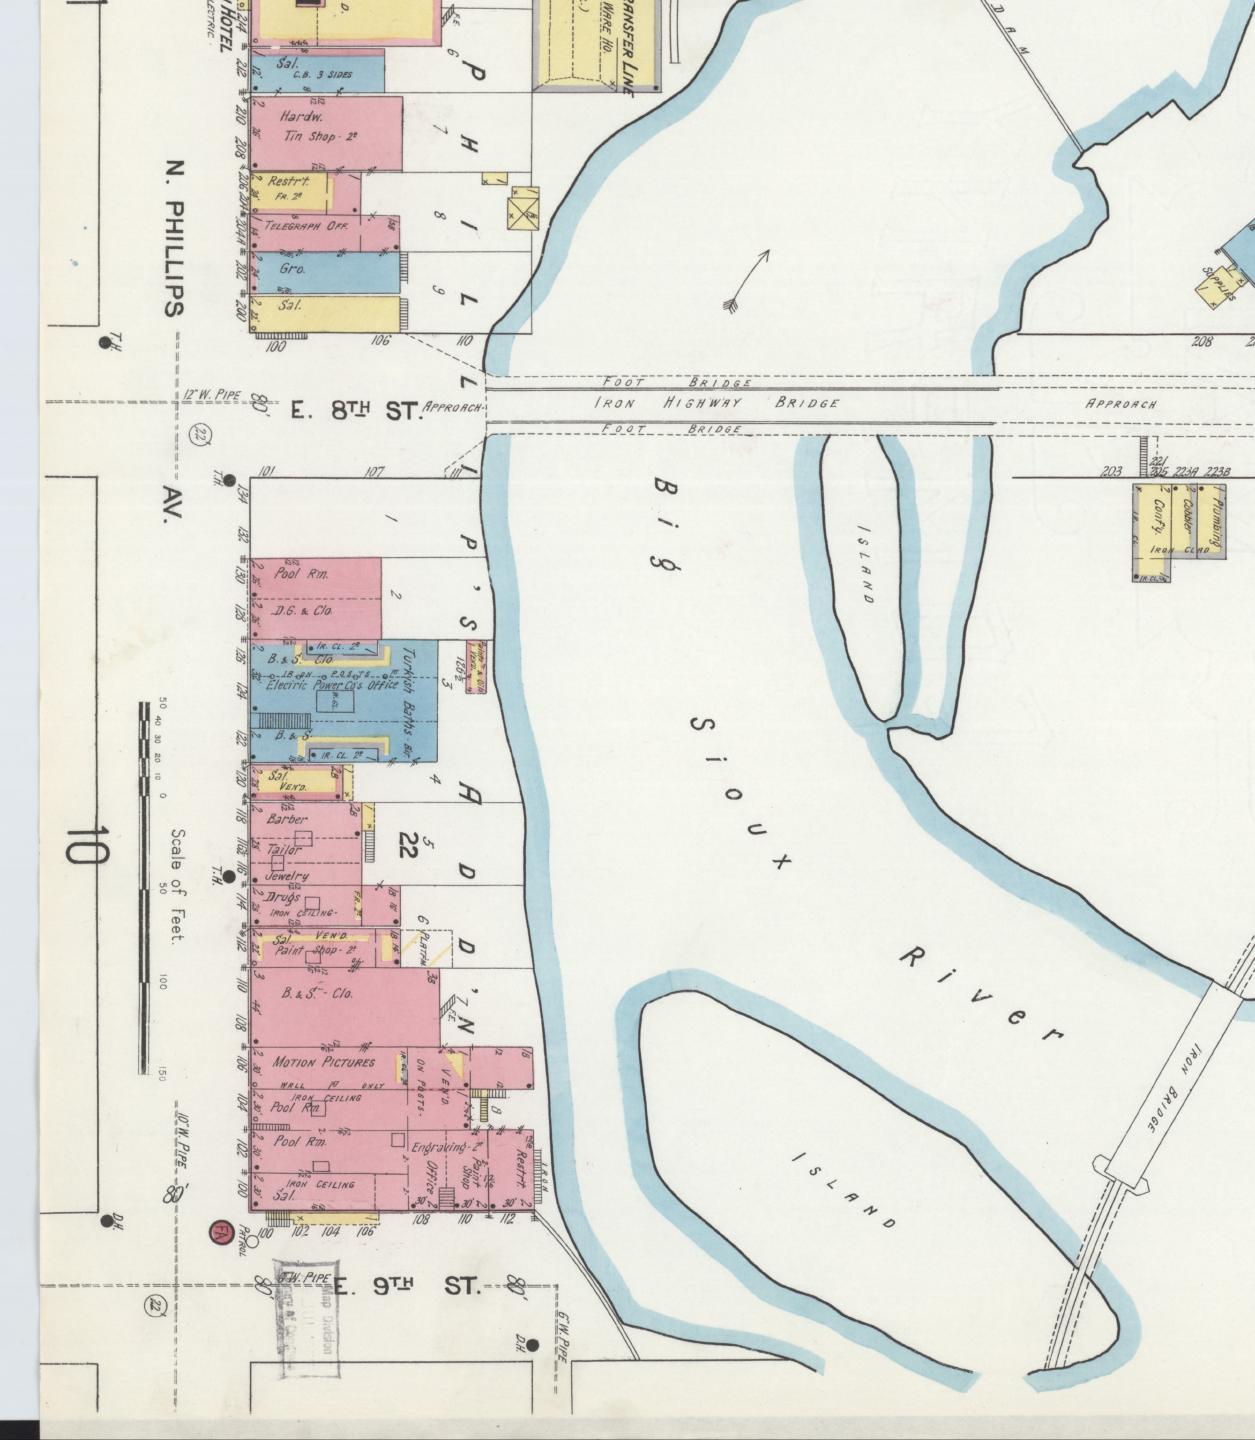 Location of Wright's barbershop in Sanborn Fire Insurance Map, Sioux Falls